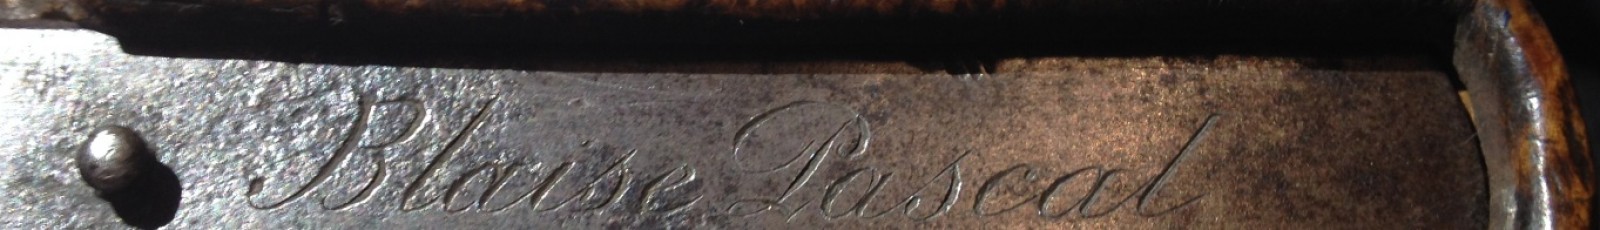 Snuffbox said to have belonged to Pascal (detail)